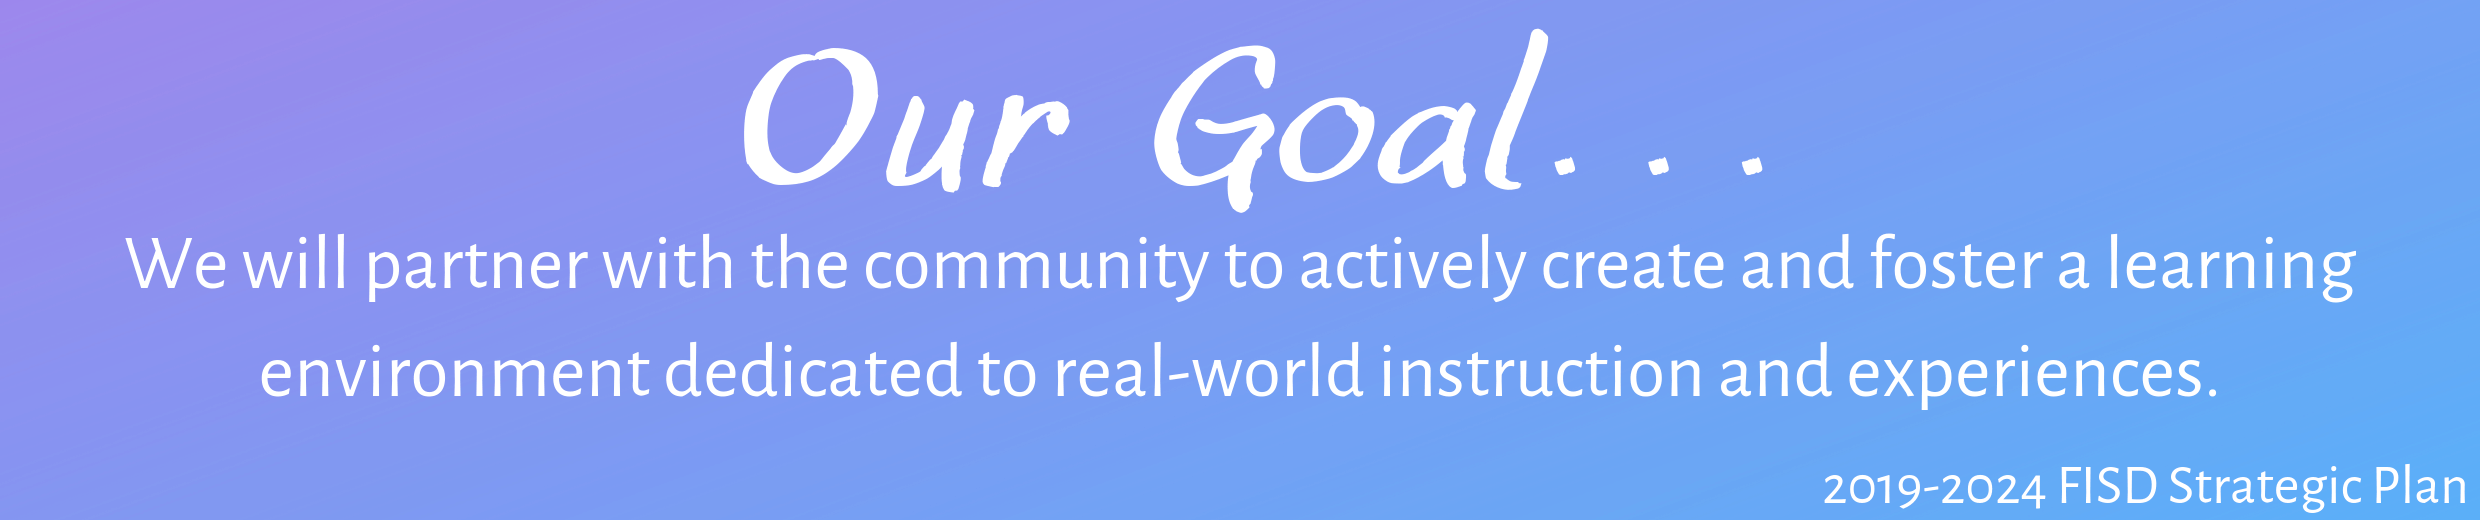 Out Goal.. We will partner with the community to actively create and foster a learning environment dedicated to real-world instruction and experiences.